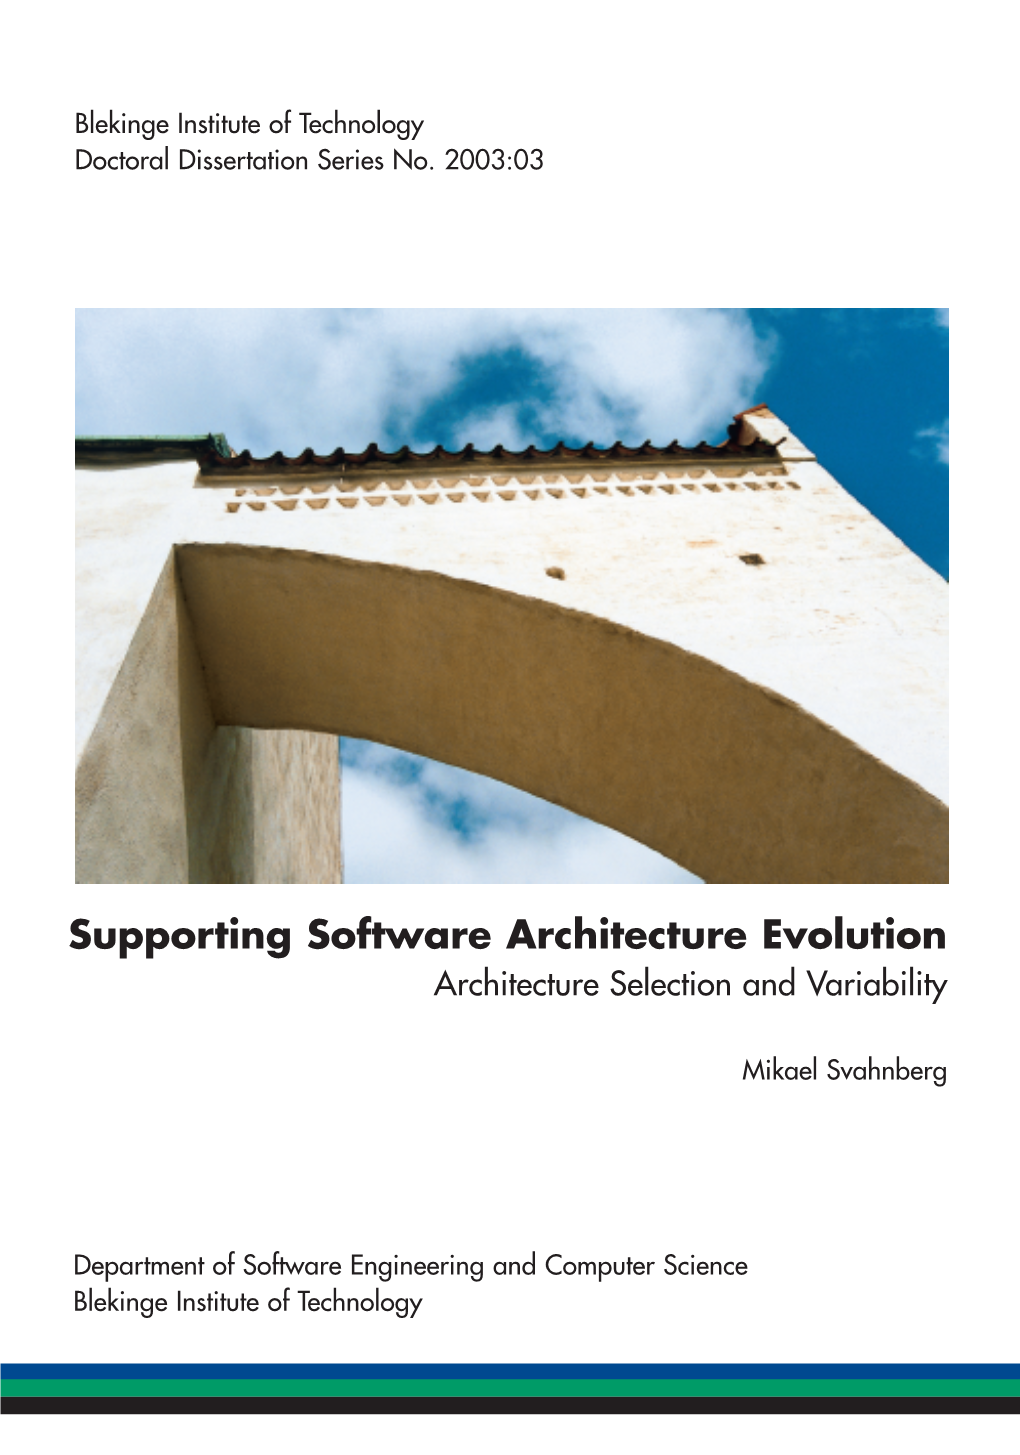 Supporting Software Architecture Evolution Supporting Blekinge Institute of Technology Doctoral Dissertation Series No